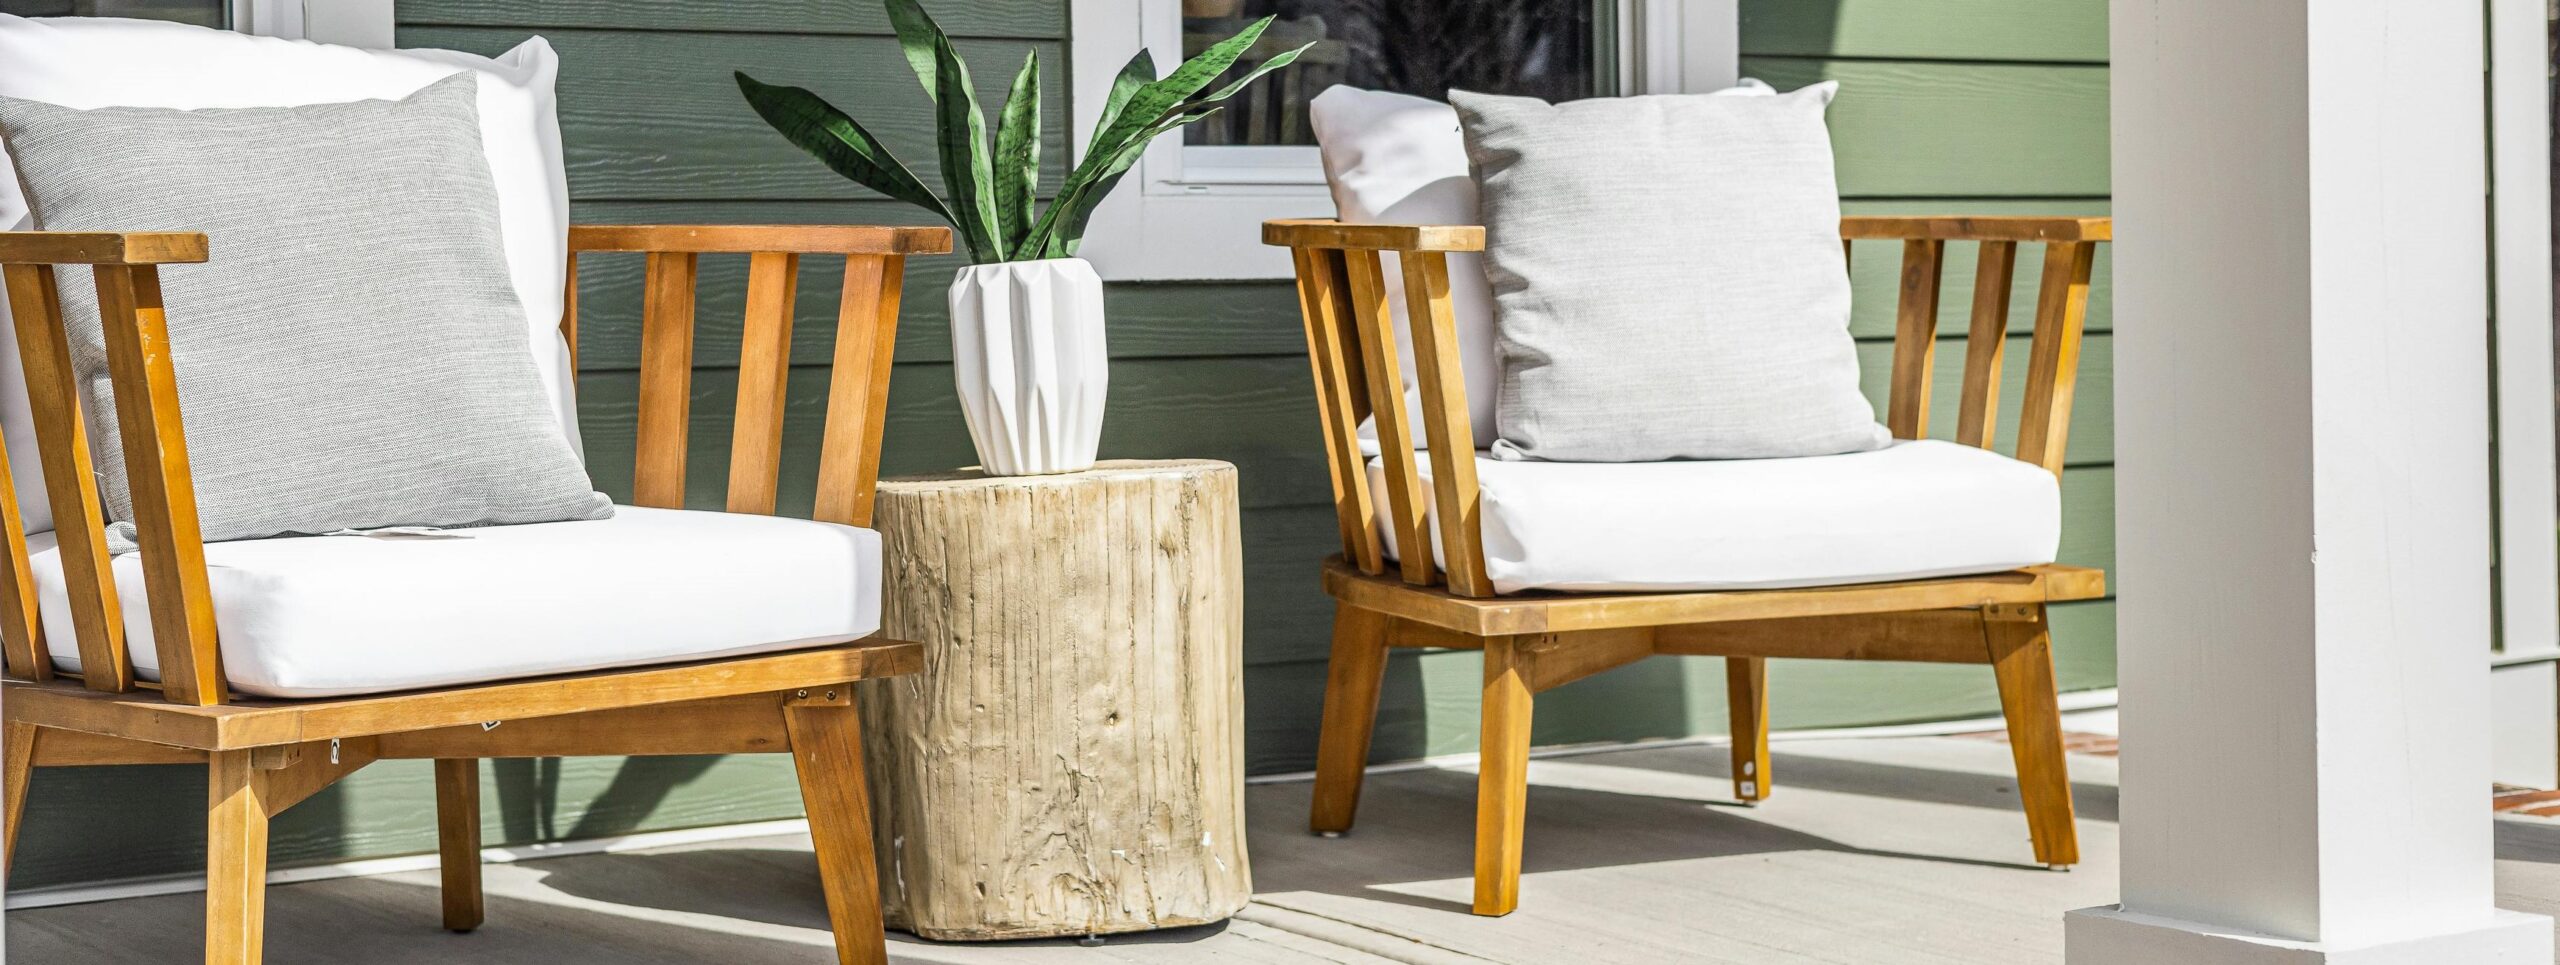 Furnishings in outdoor spaces get a lot of wear and tear.